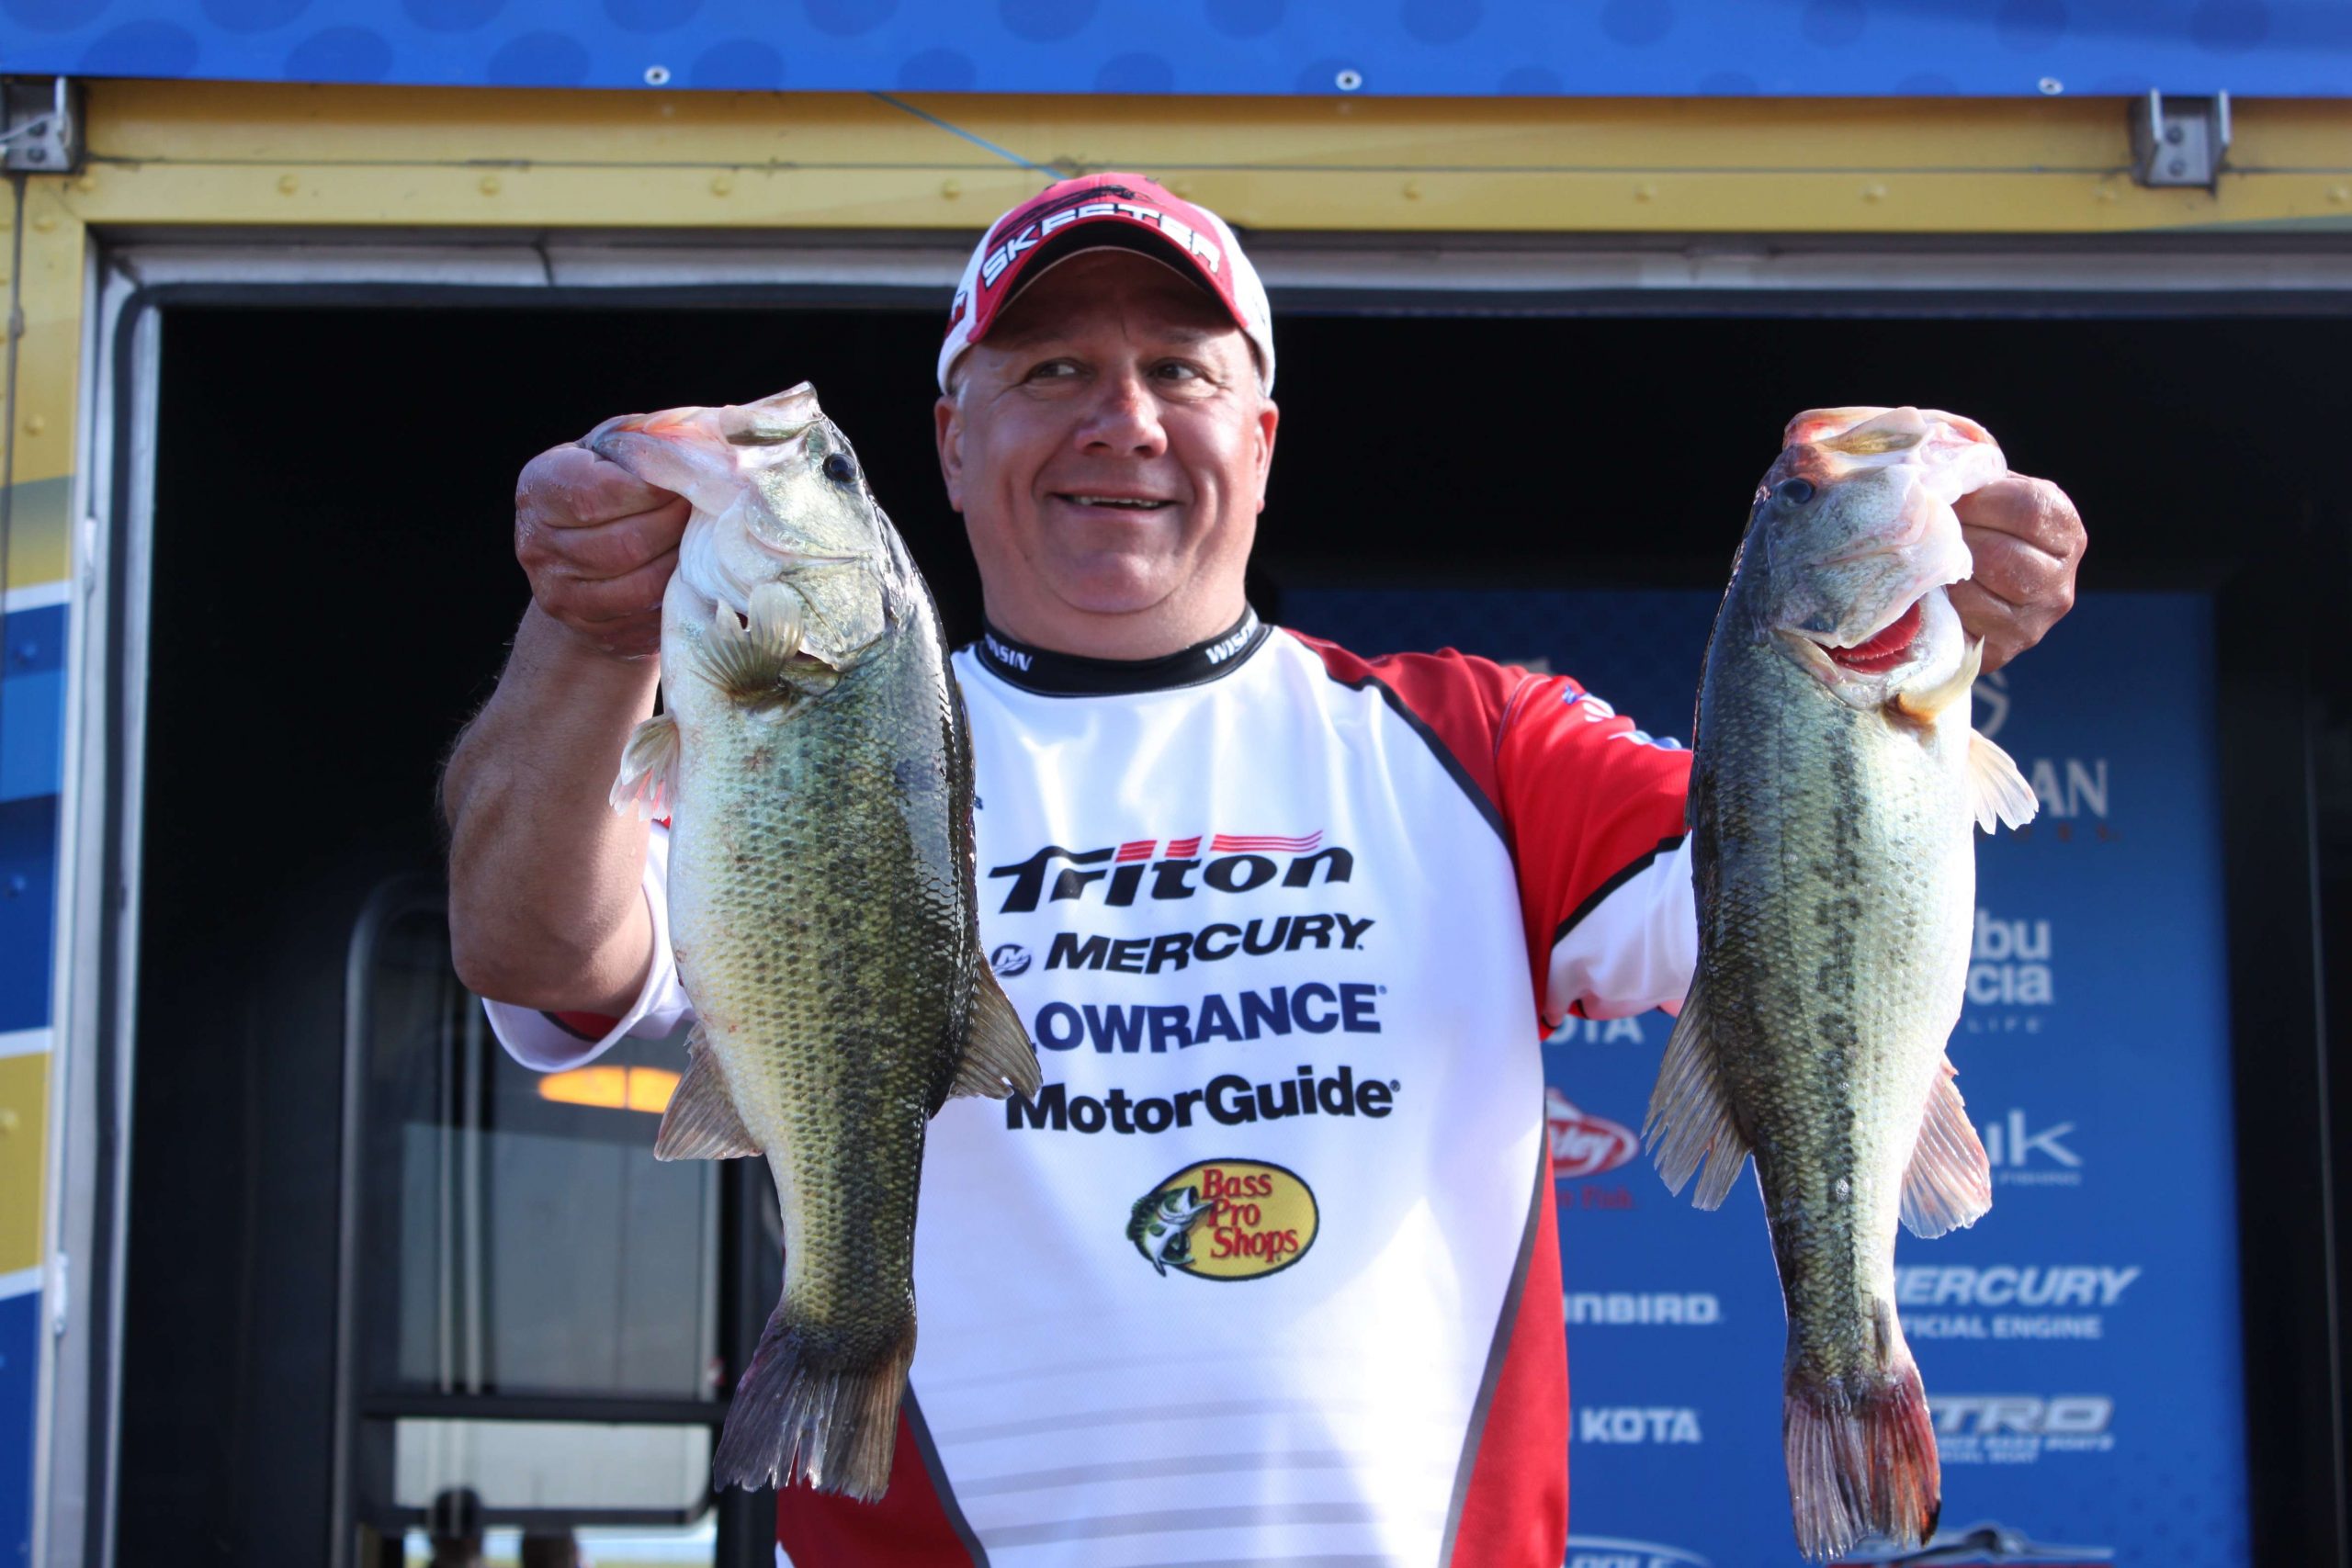 Gary Adkins of Wisconsin is in 18th place in the boater division with 29-14 over two days.